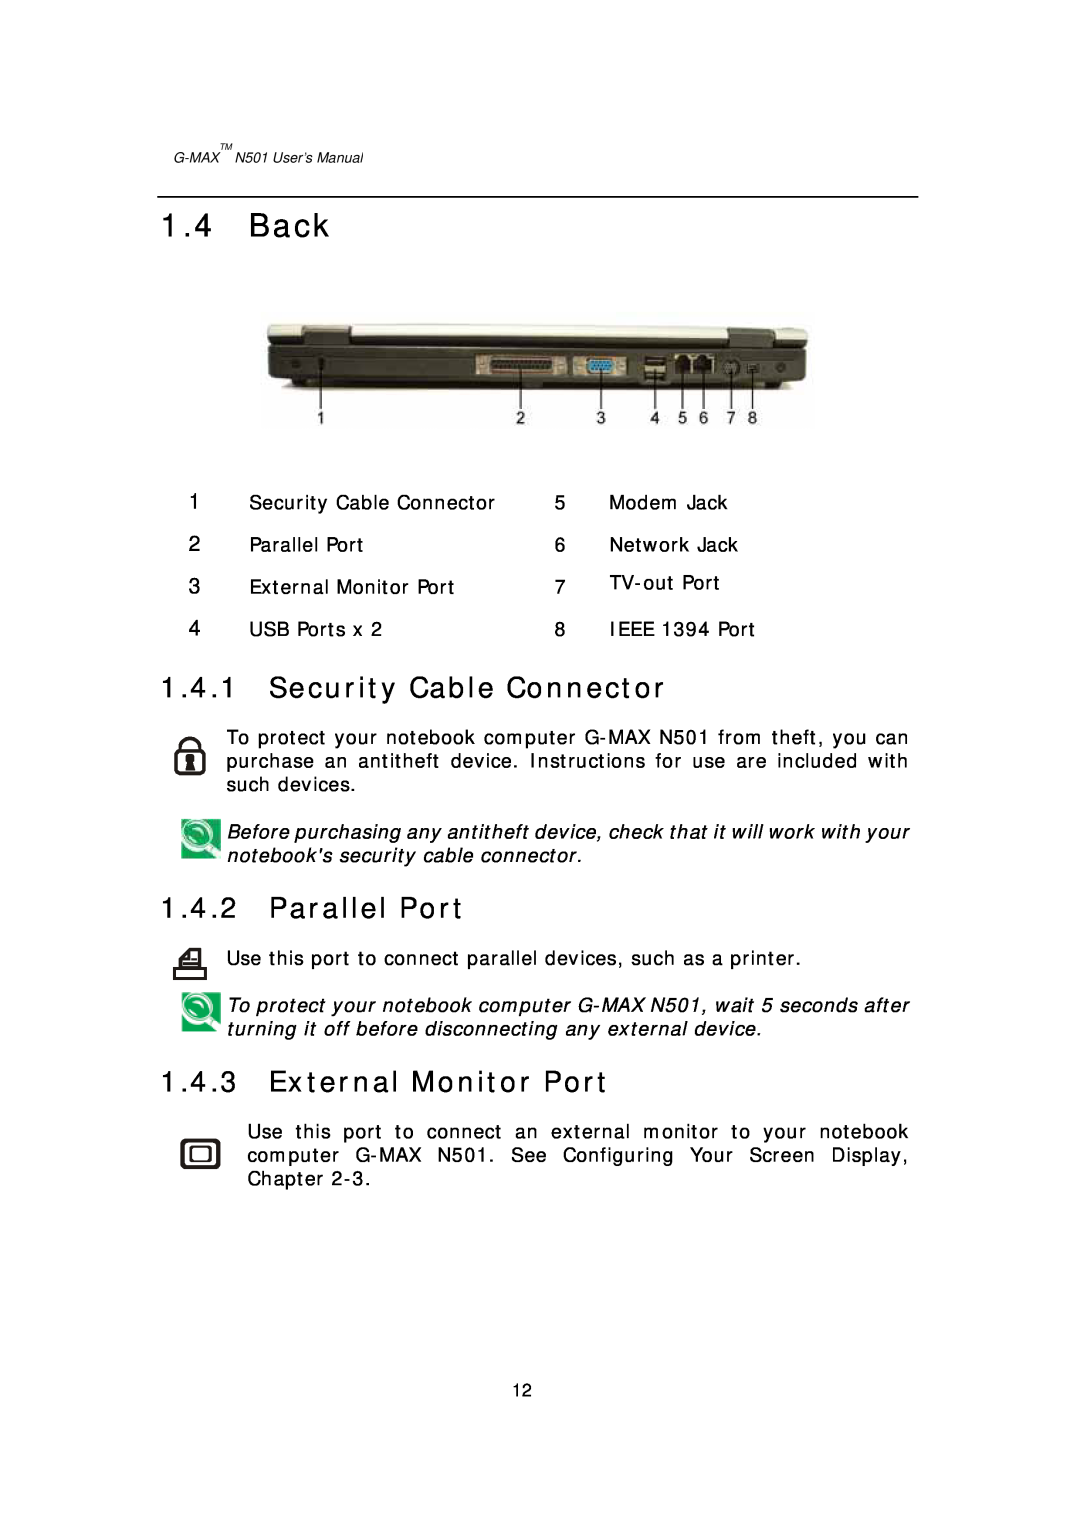 Gigabyte G-MAX N501 user manual Back, Security Cable Connector, Parallel Port, External Monitor Port 